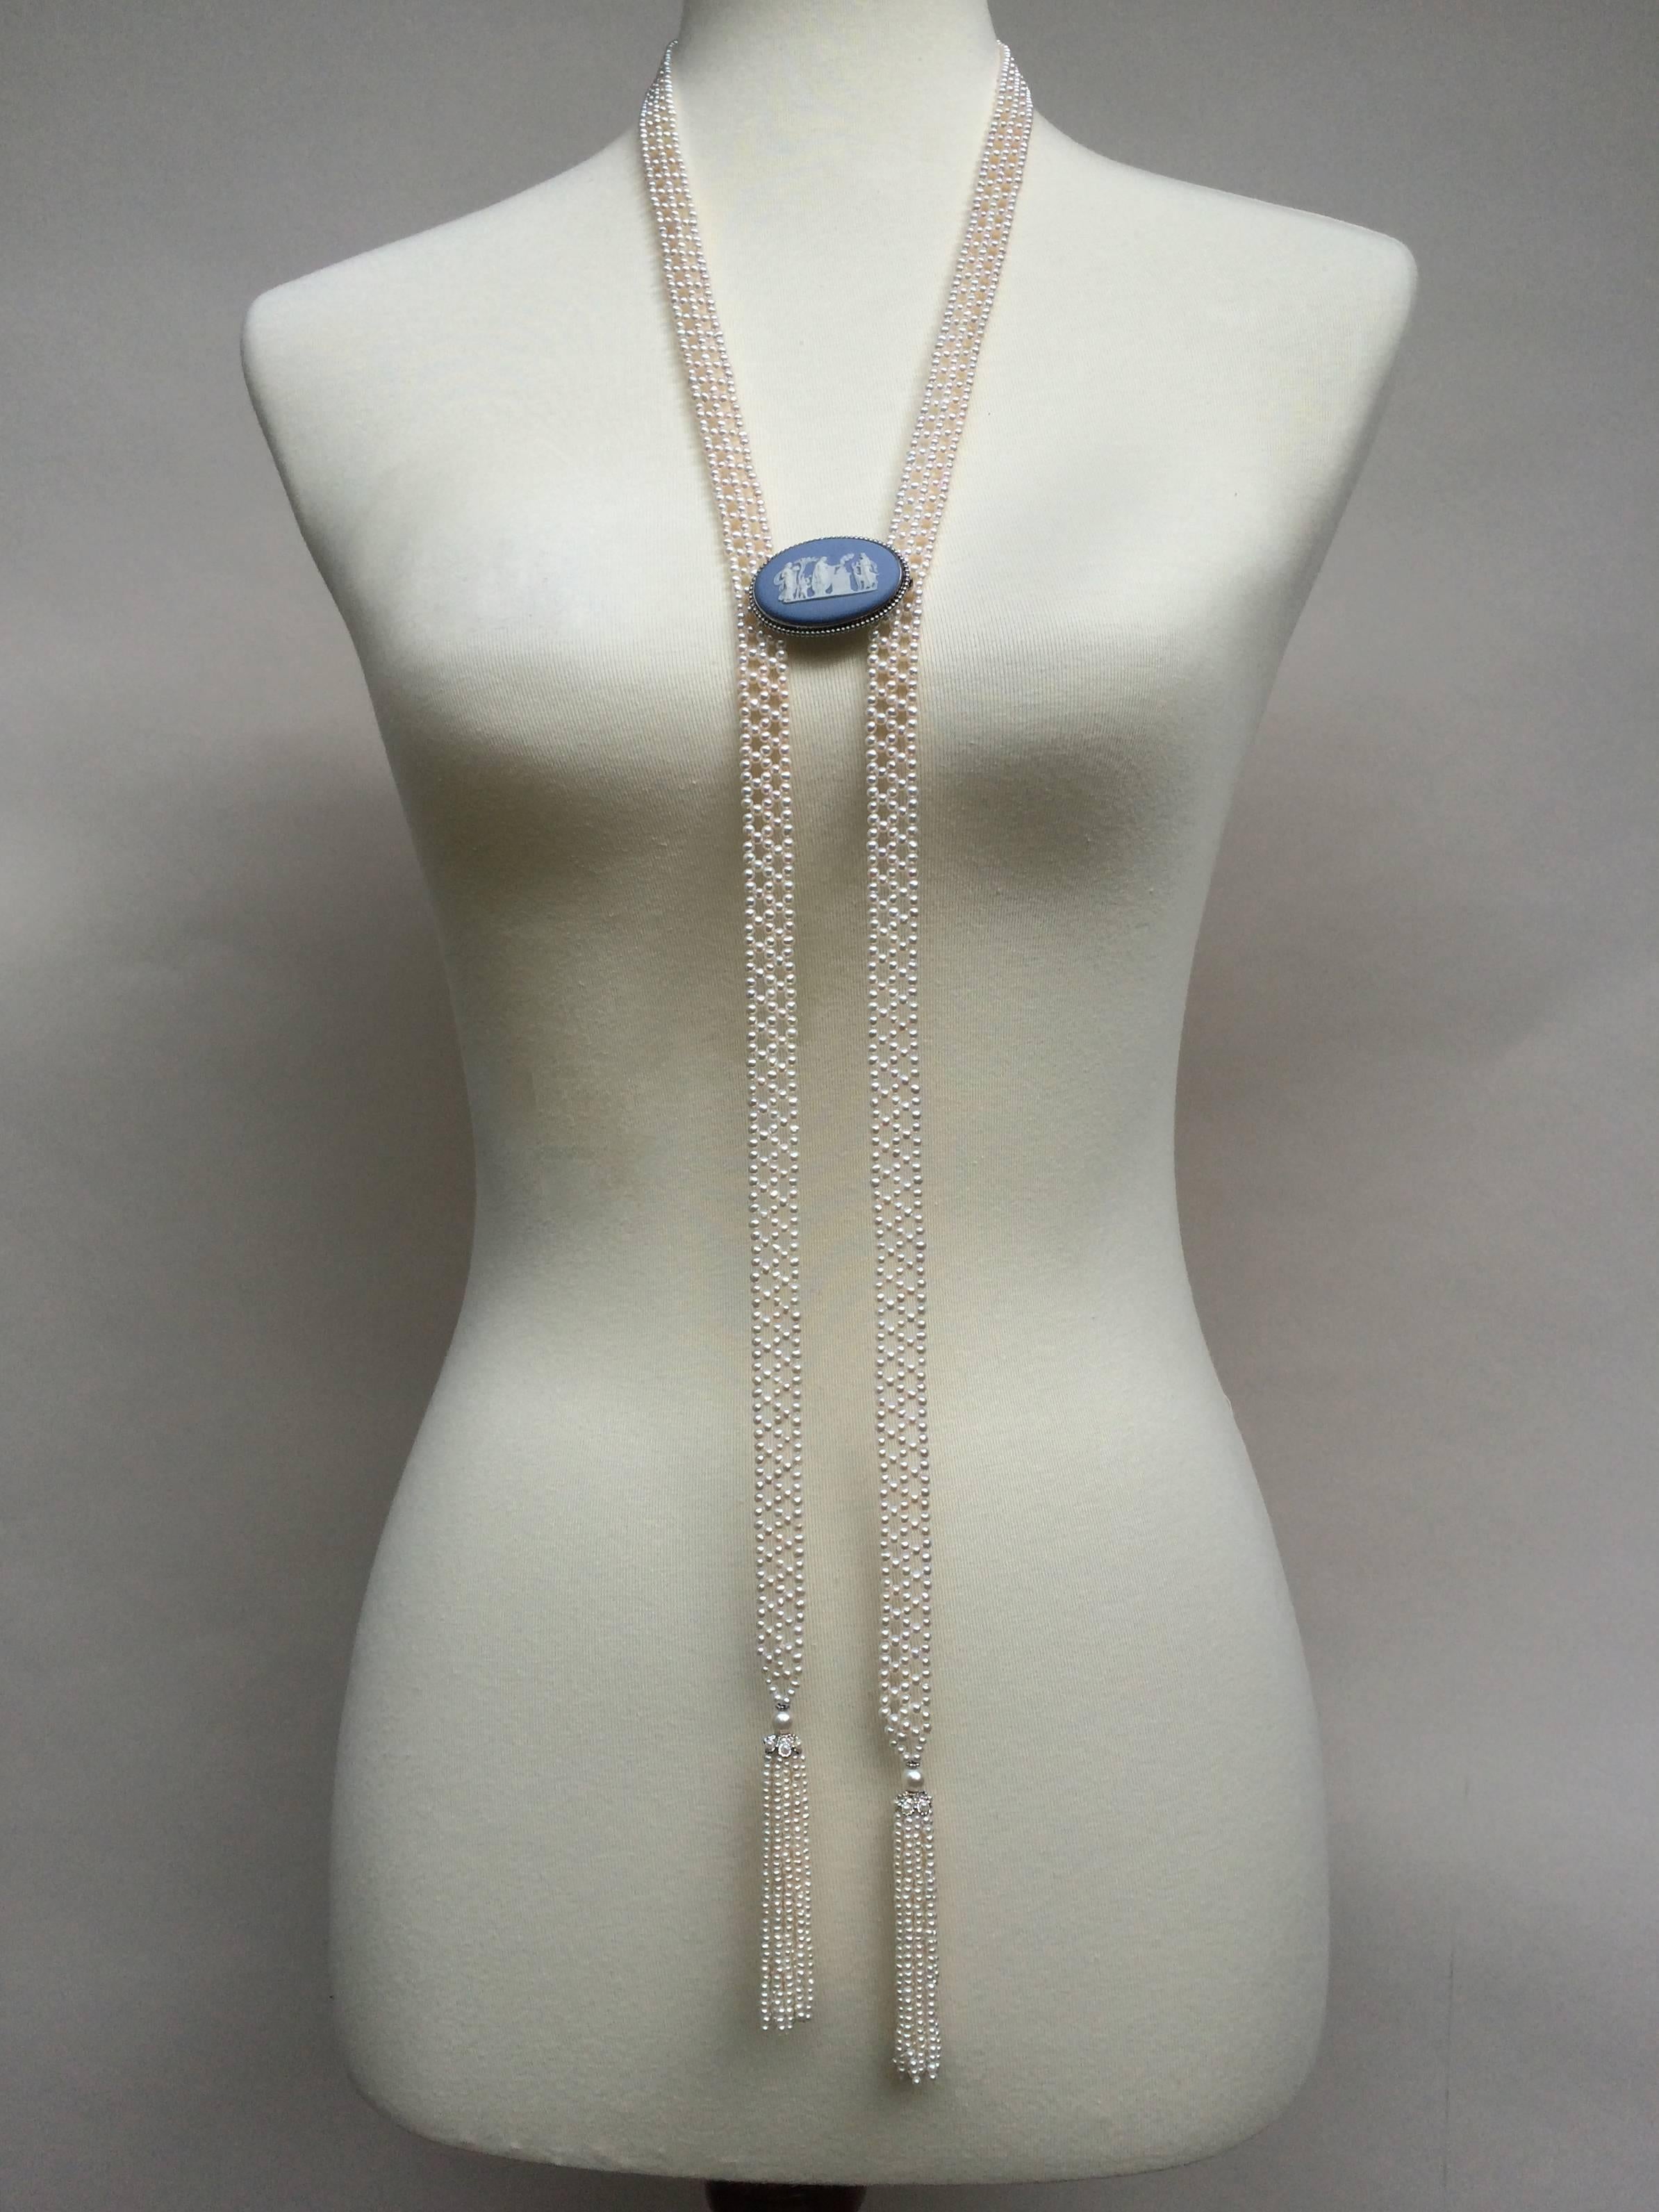 Marina J. presents a unique handmade sautoir necklace, made of small white 2- 2.5 mm pearls and woven into a complex, double lace-like design. The ends of the necklace taper into small pearls, and are complimented by 14 k white gold cups. The lush